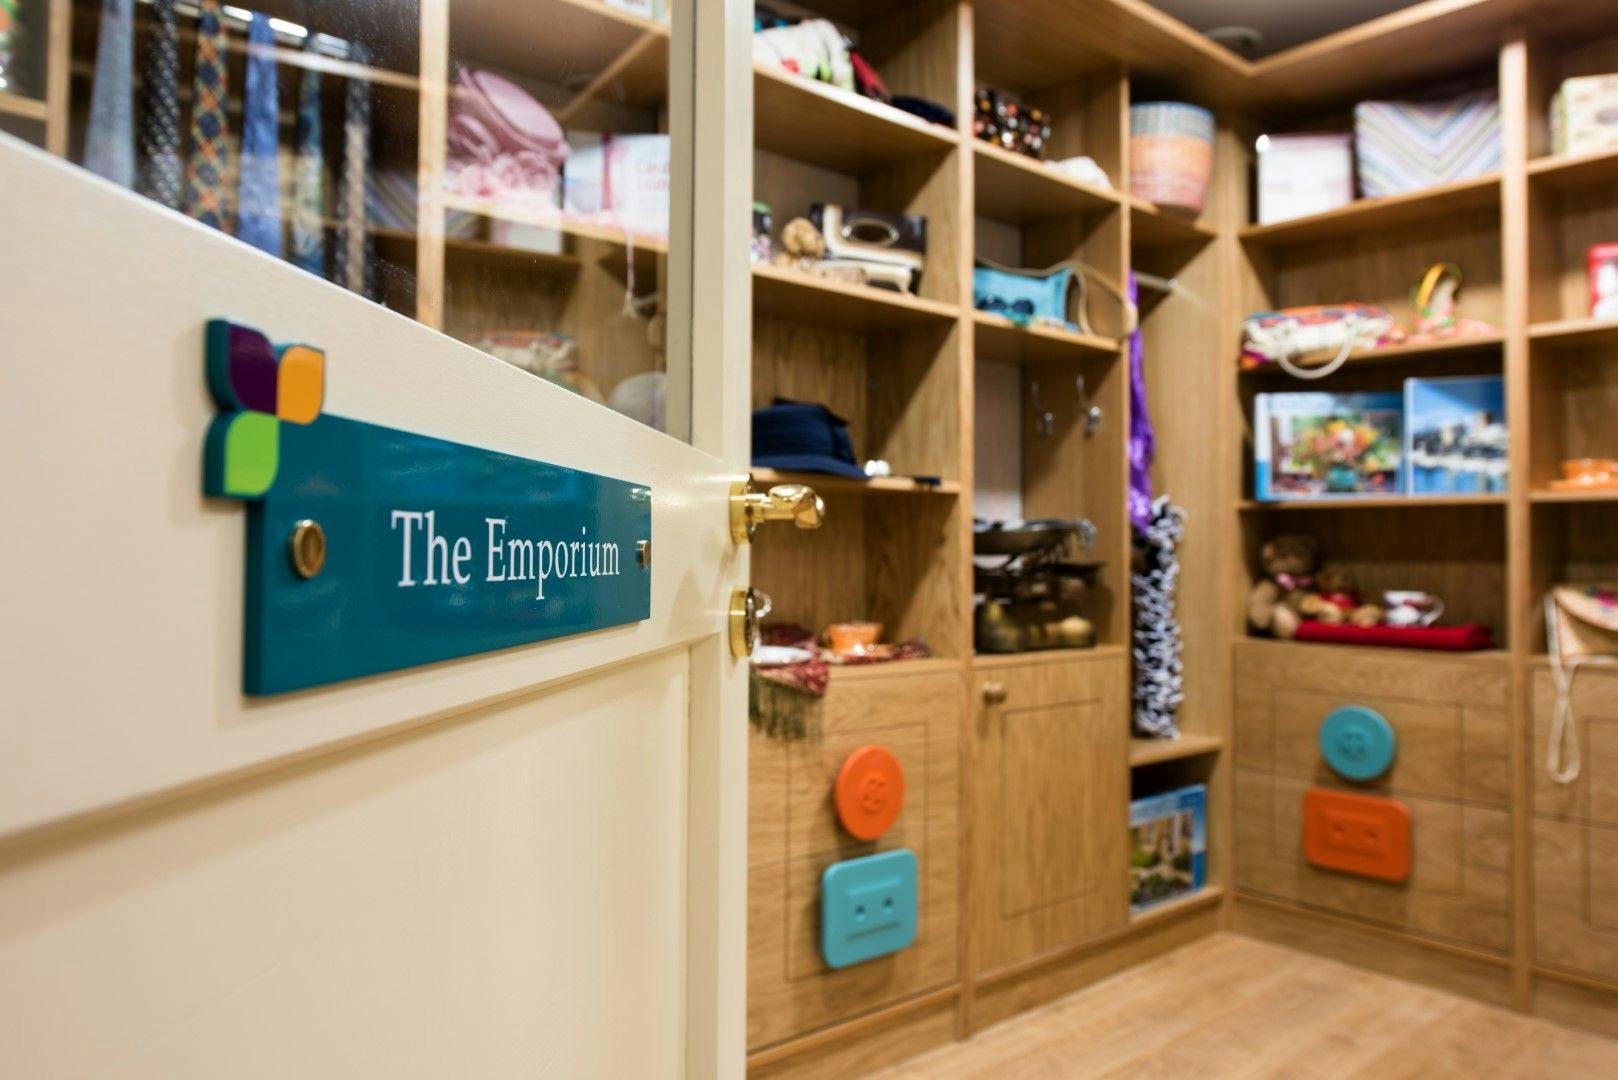 Shop at Anya court Care Home in Rugby, Warwickshire